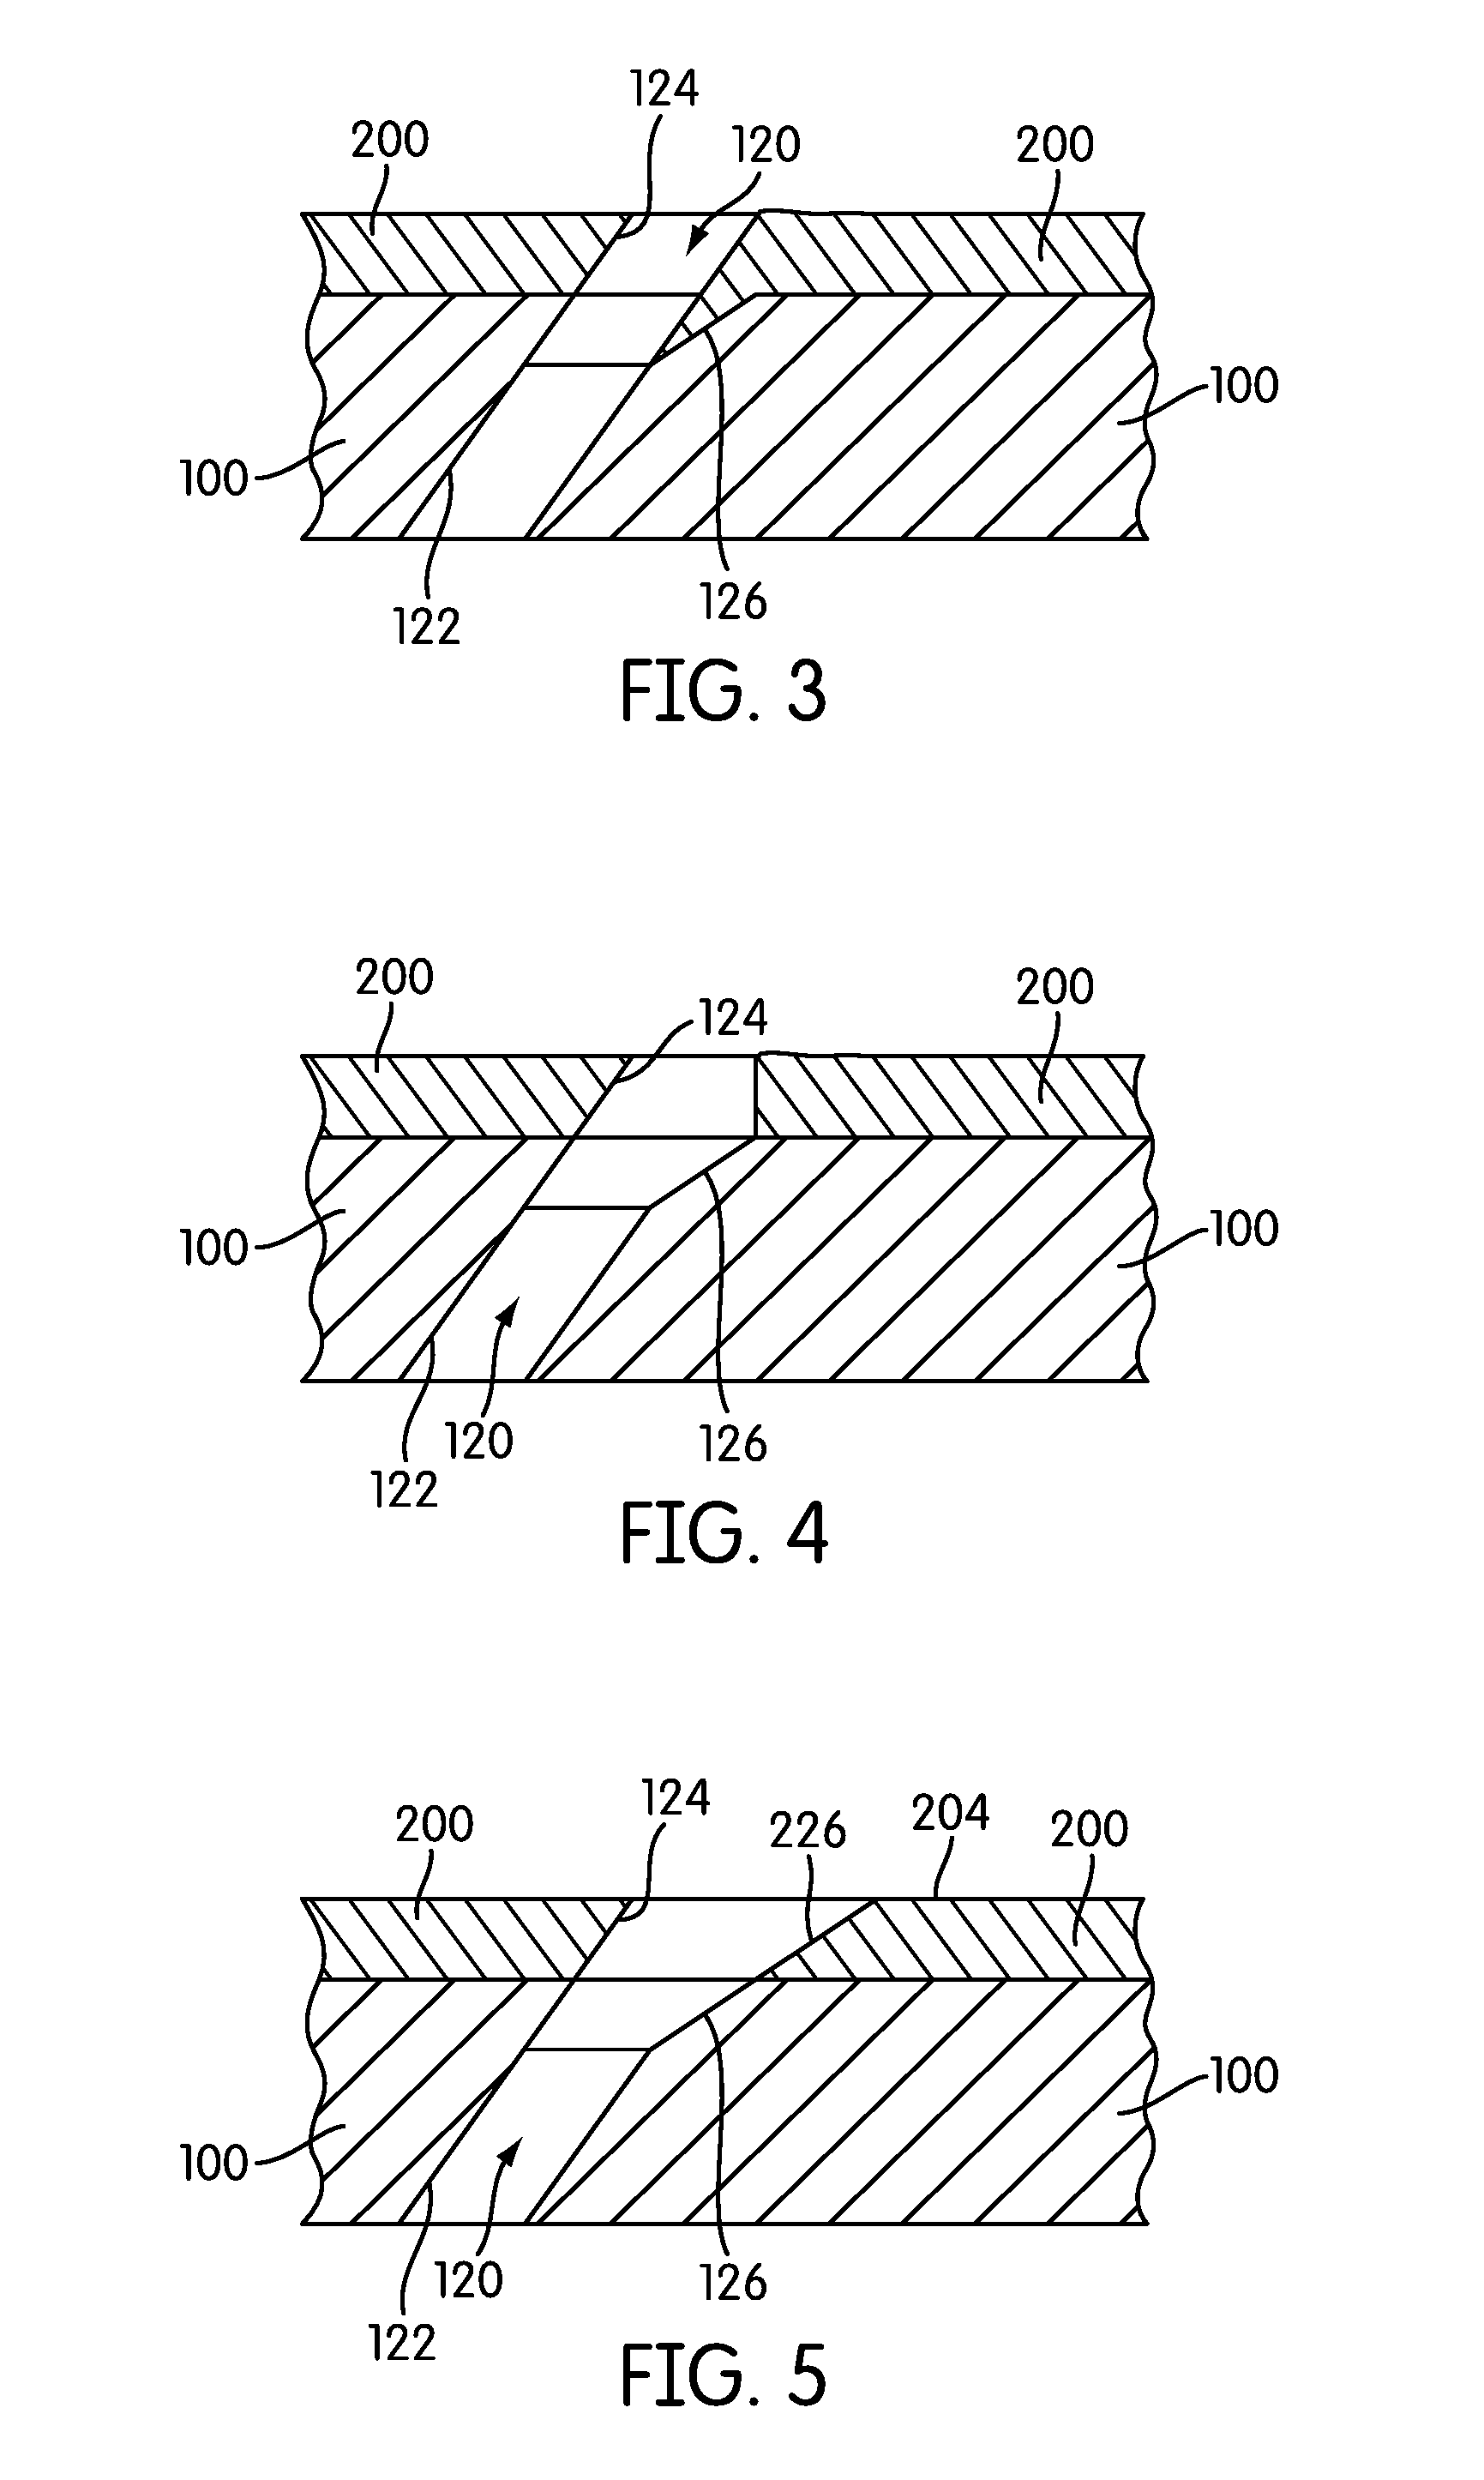 Method for providing a film cooled article